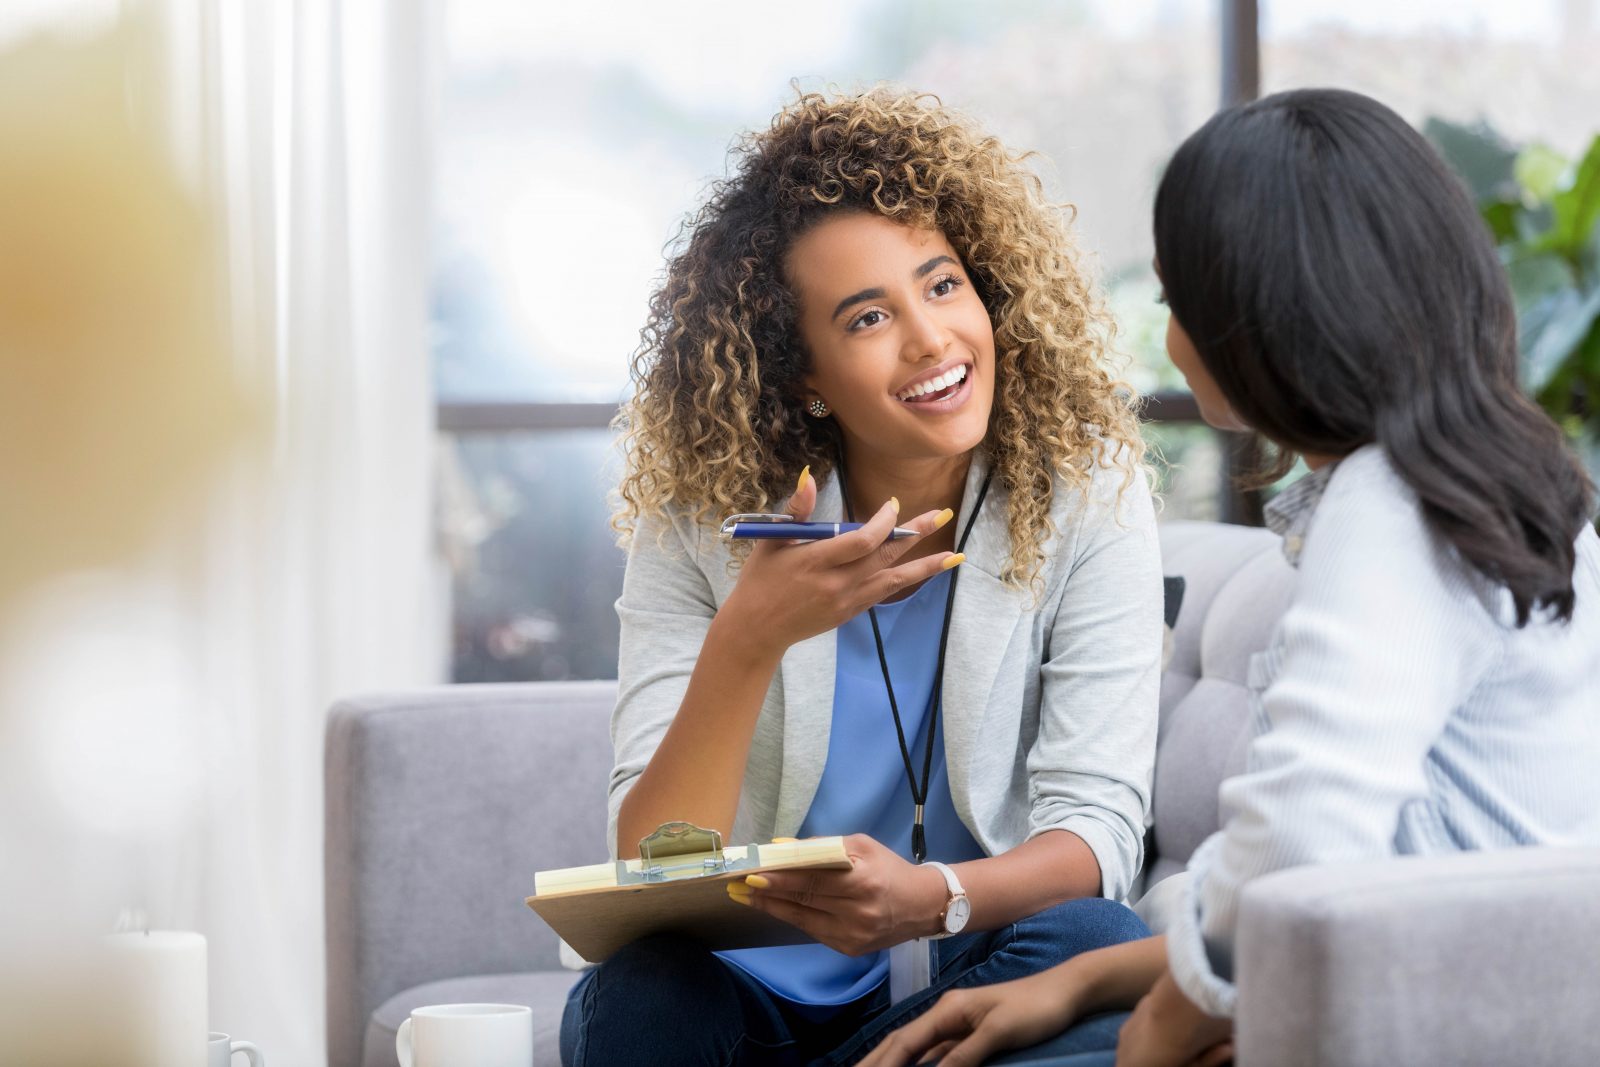 A young female therapist gestures as she talks with a female client. The therapist smiles warmly as she talks with the young woman.